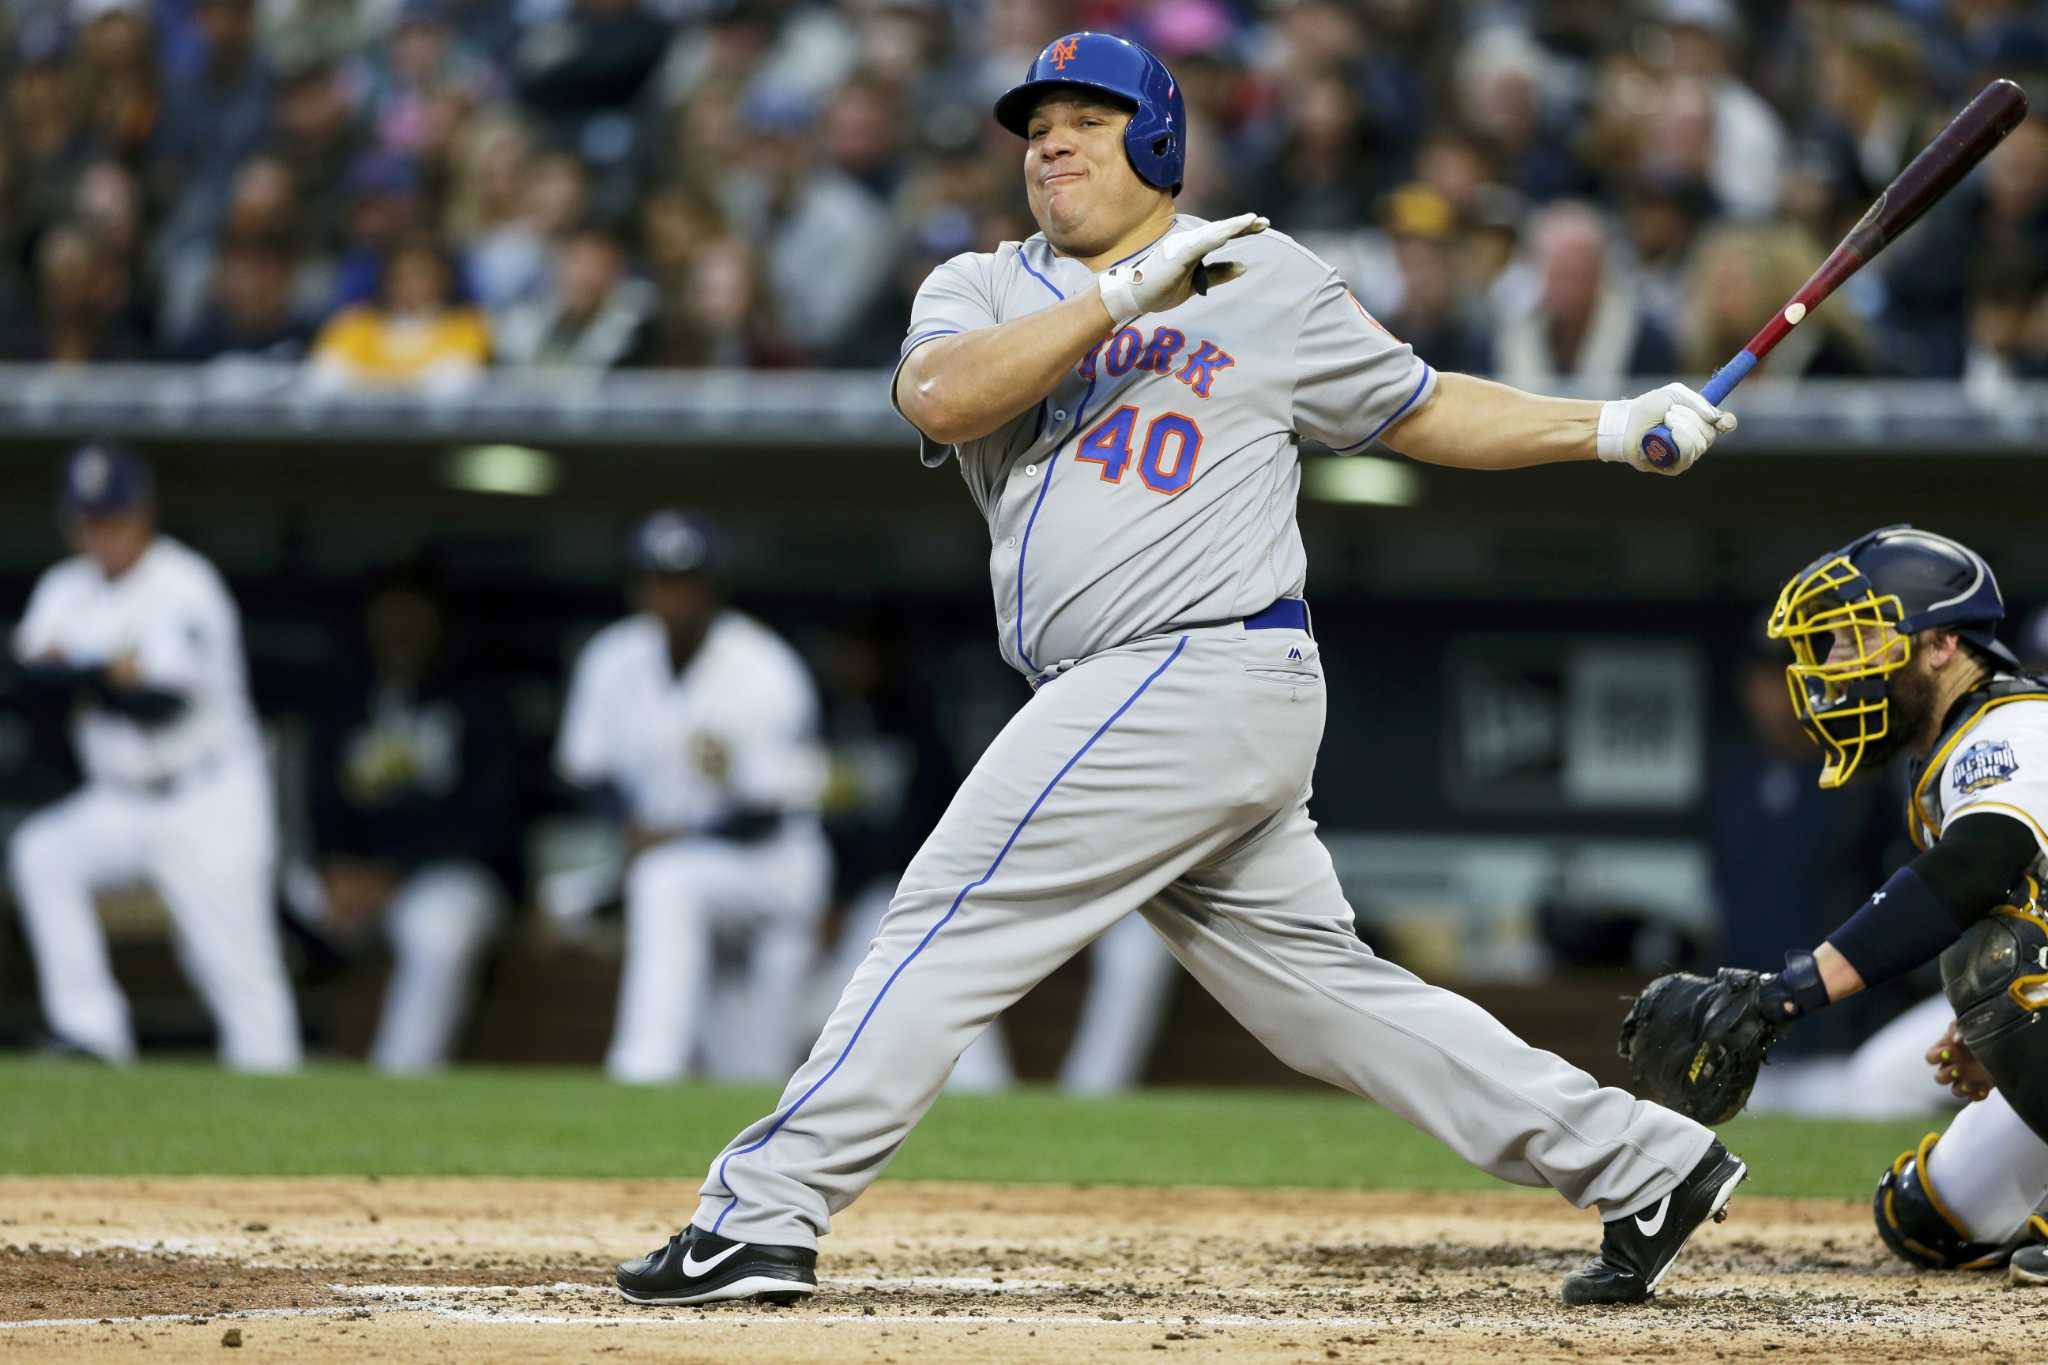 Mets History: Bartolo Colon's improbable Mets home run, six years later